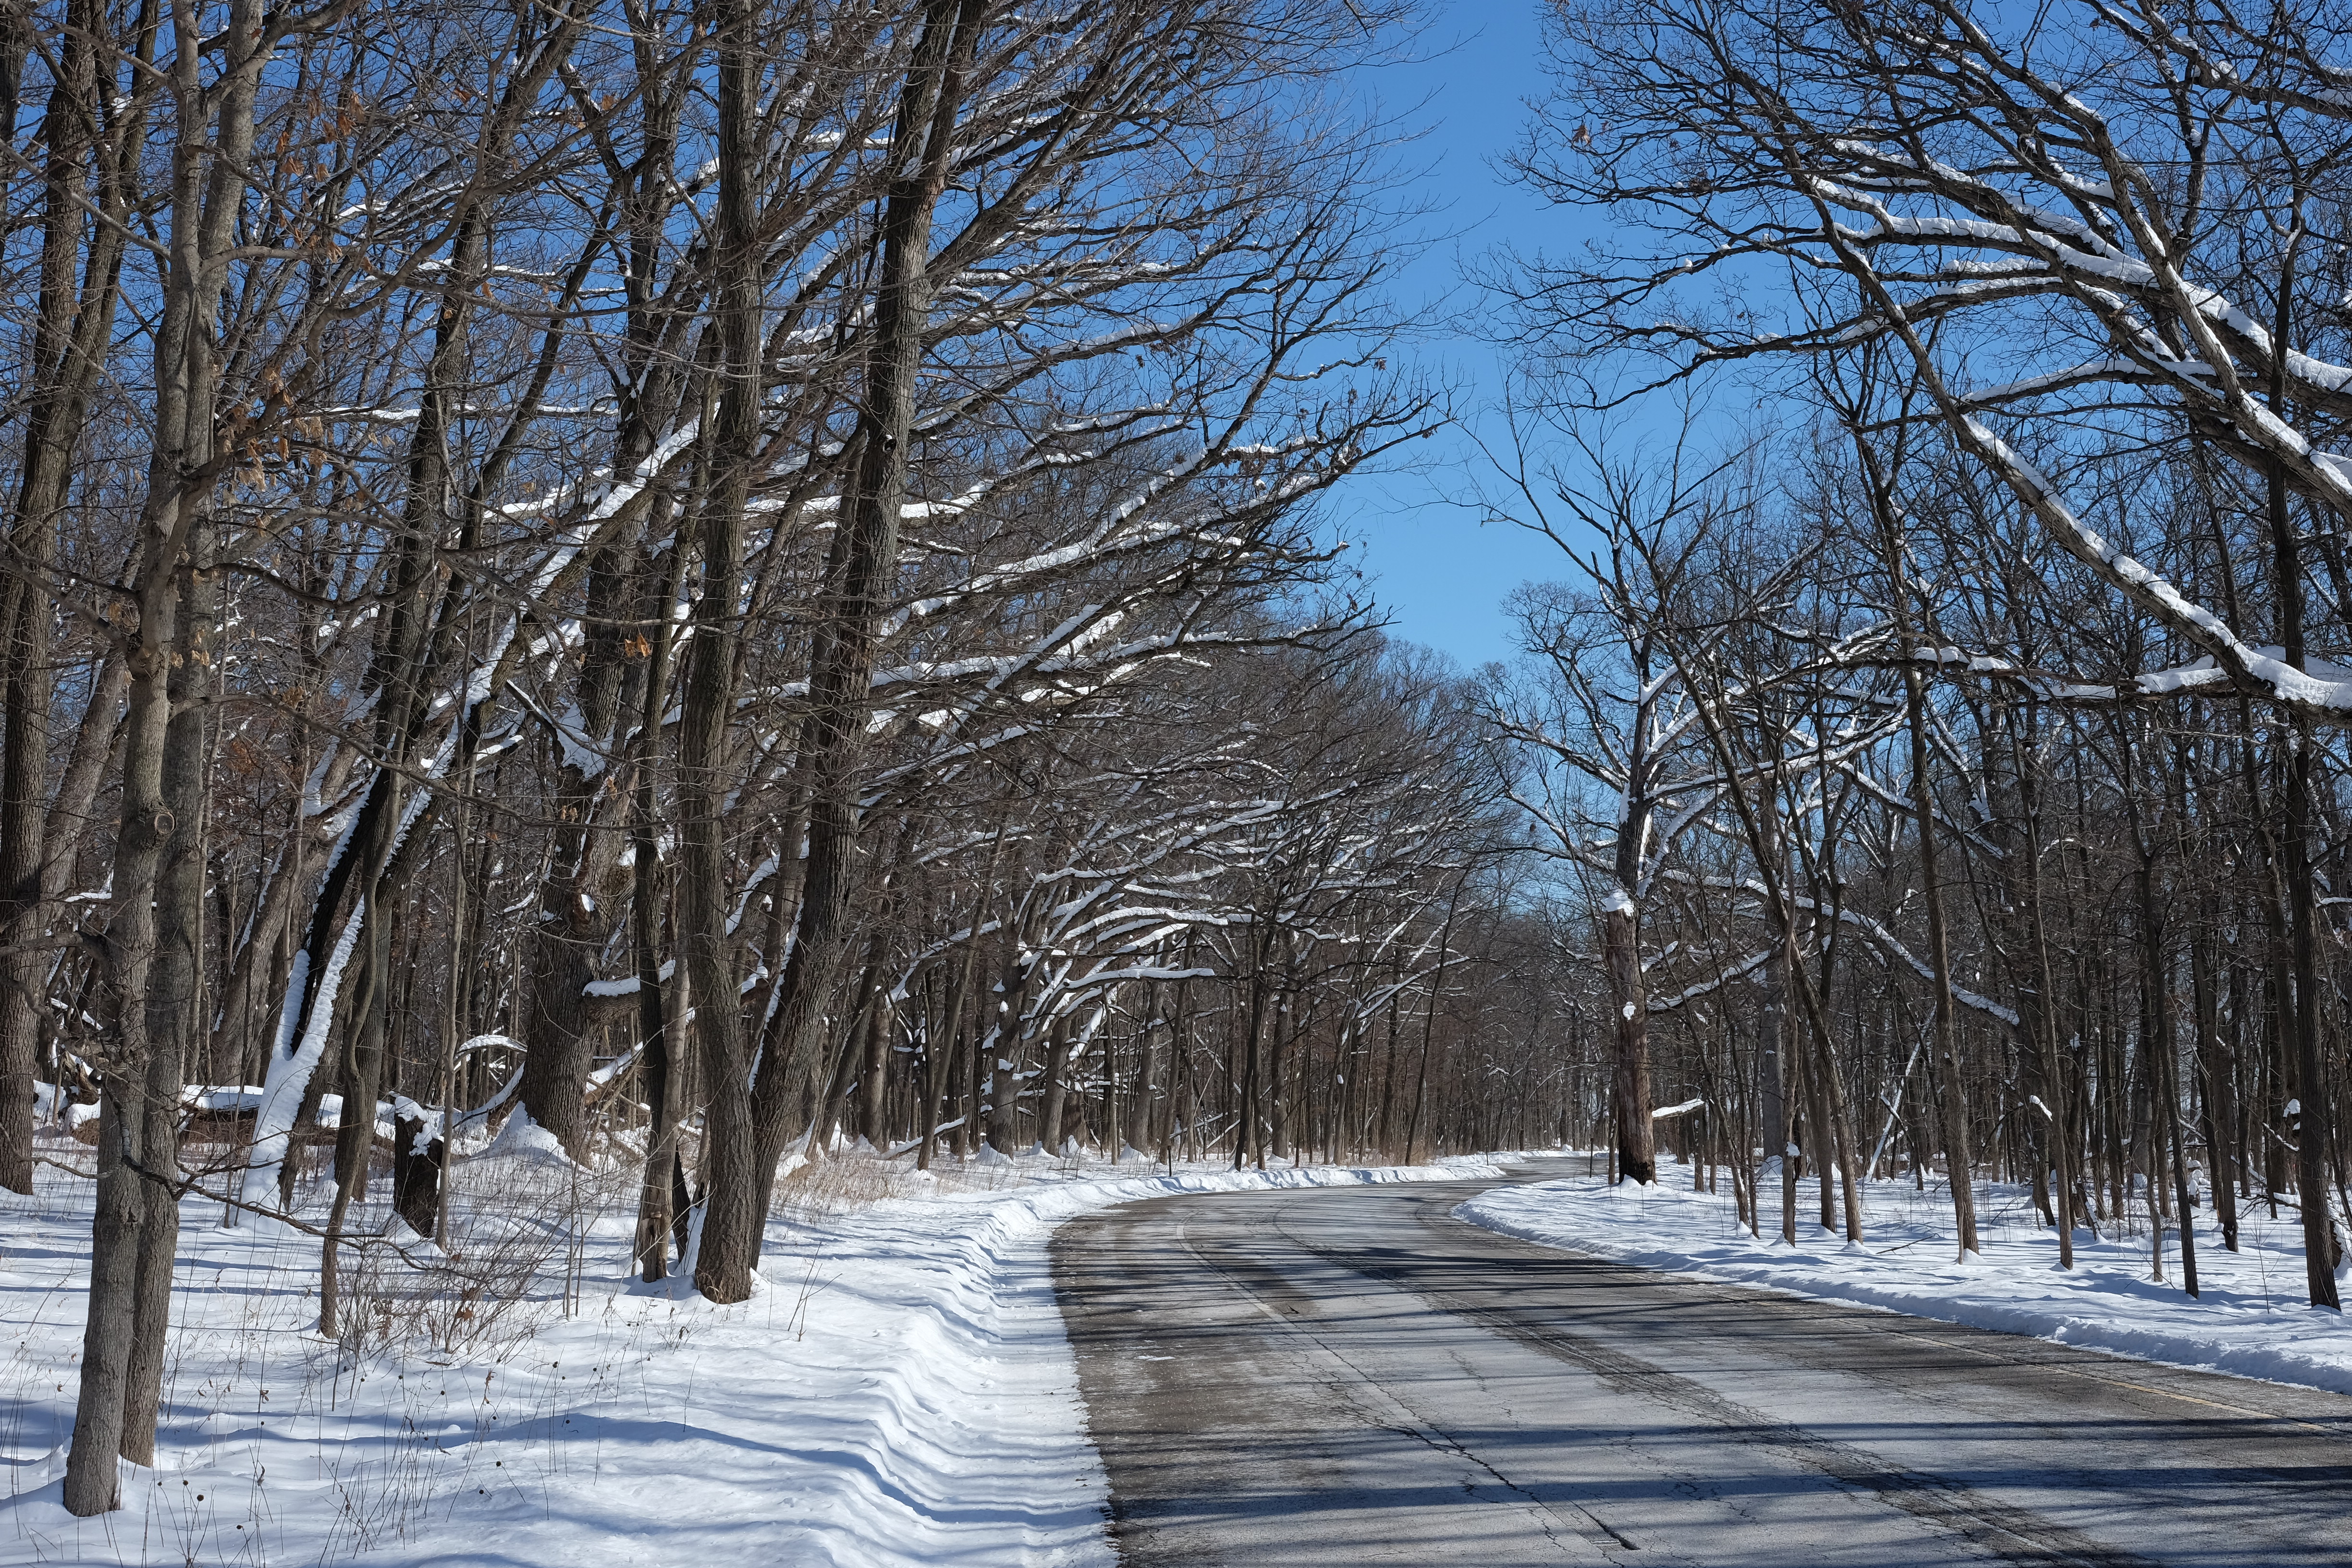 (1/2) Snow sharpens the silhouettes of trees in winter. Photo: Daniel Munger, winter, woods, snow, tree, nature, landscape